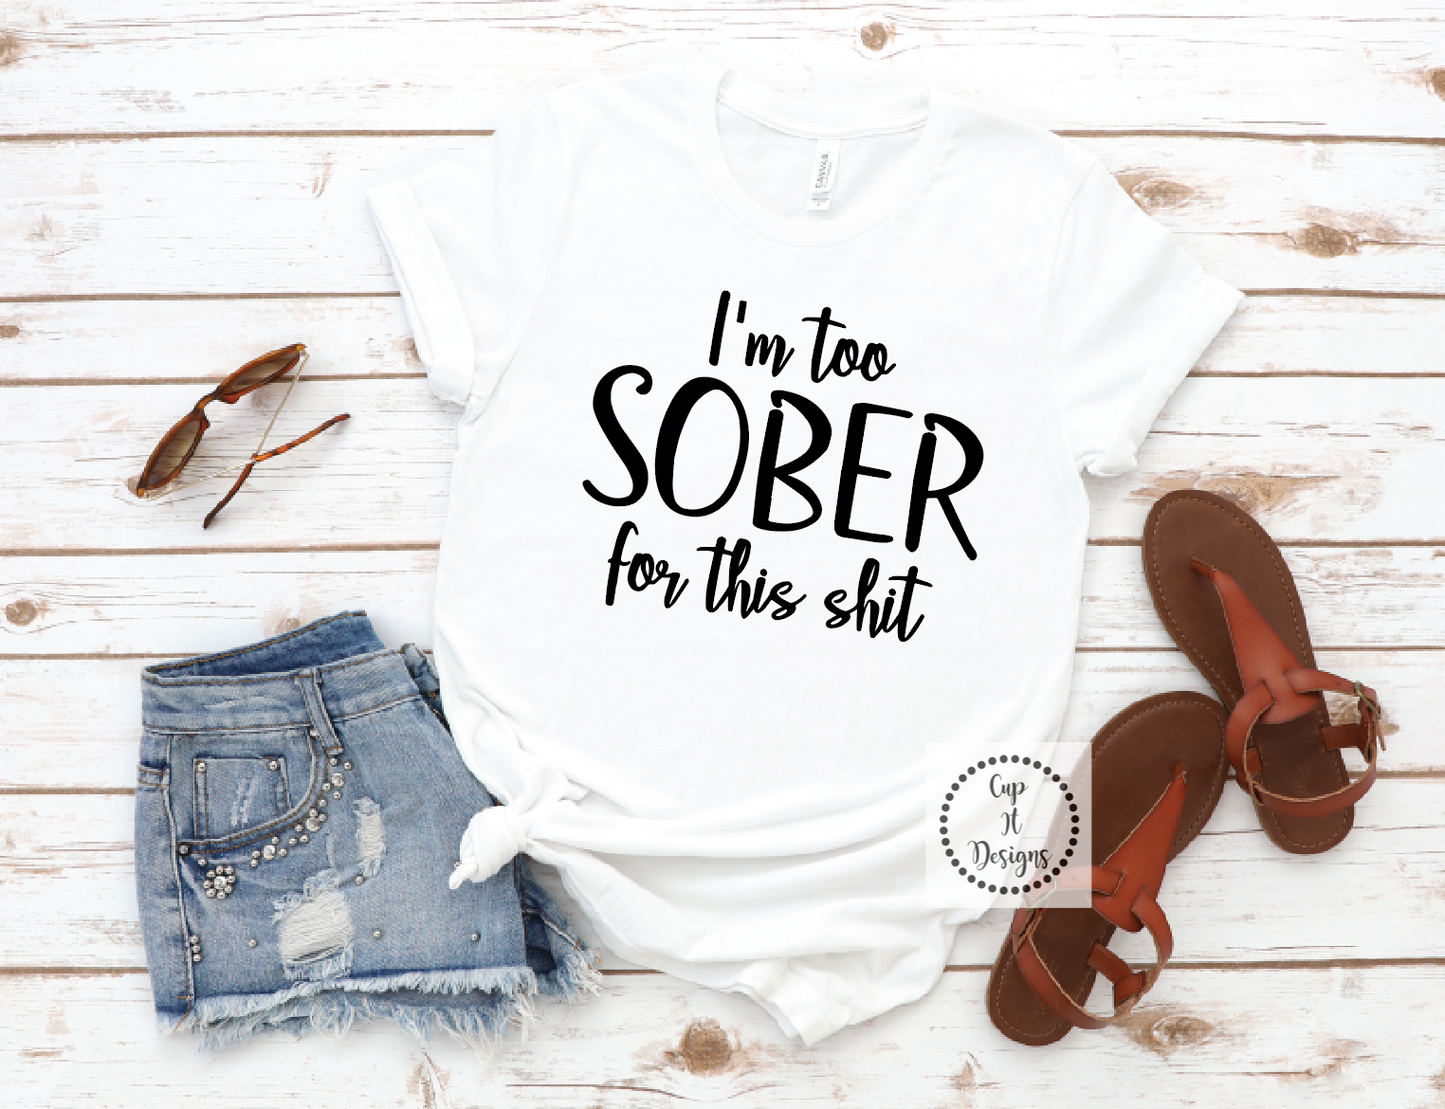 Women's "I'm too sober for this sh**" Tee